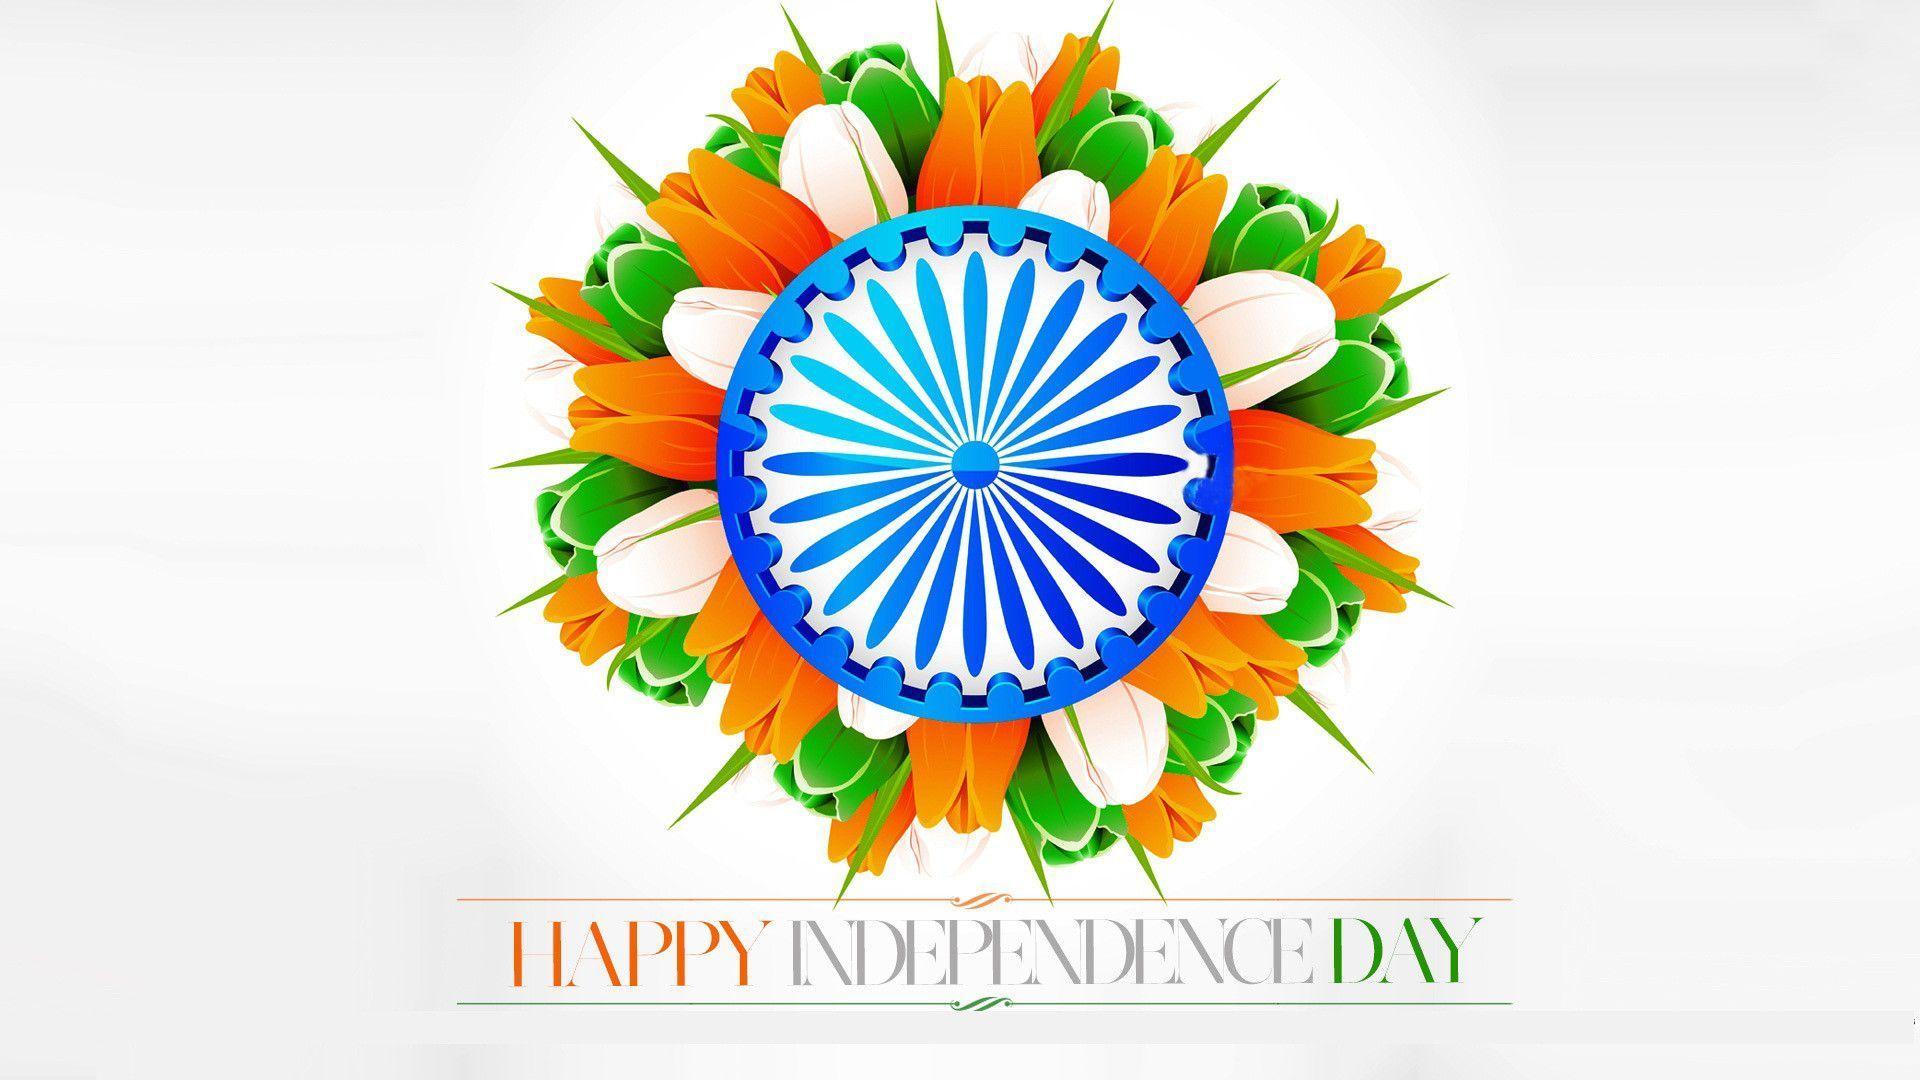 independence day greetings image Best Wallpaper